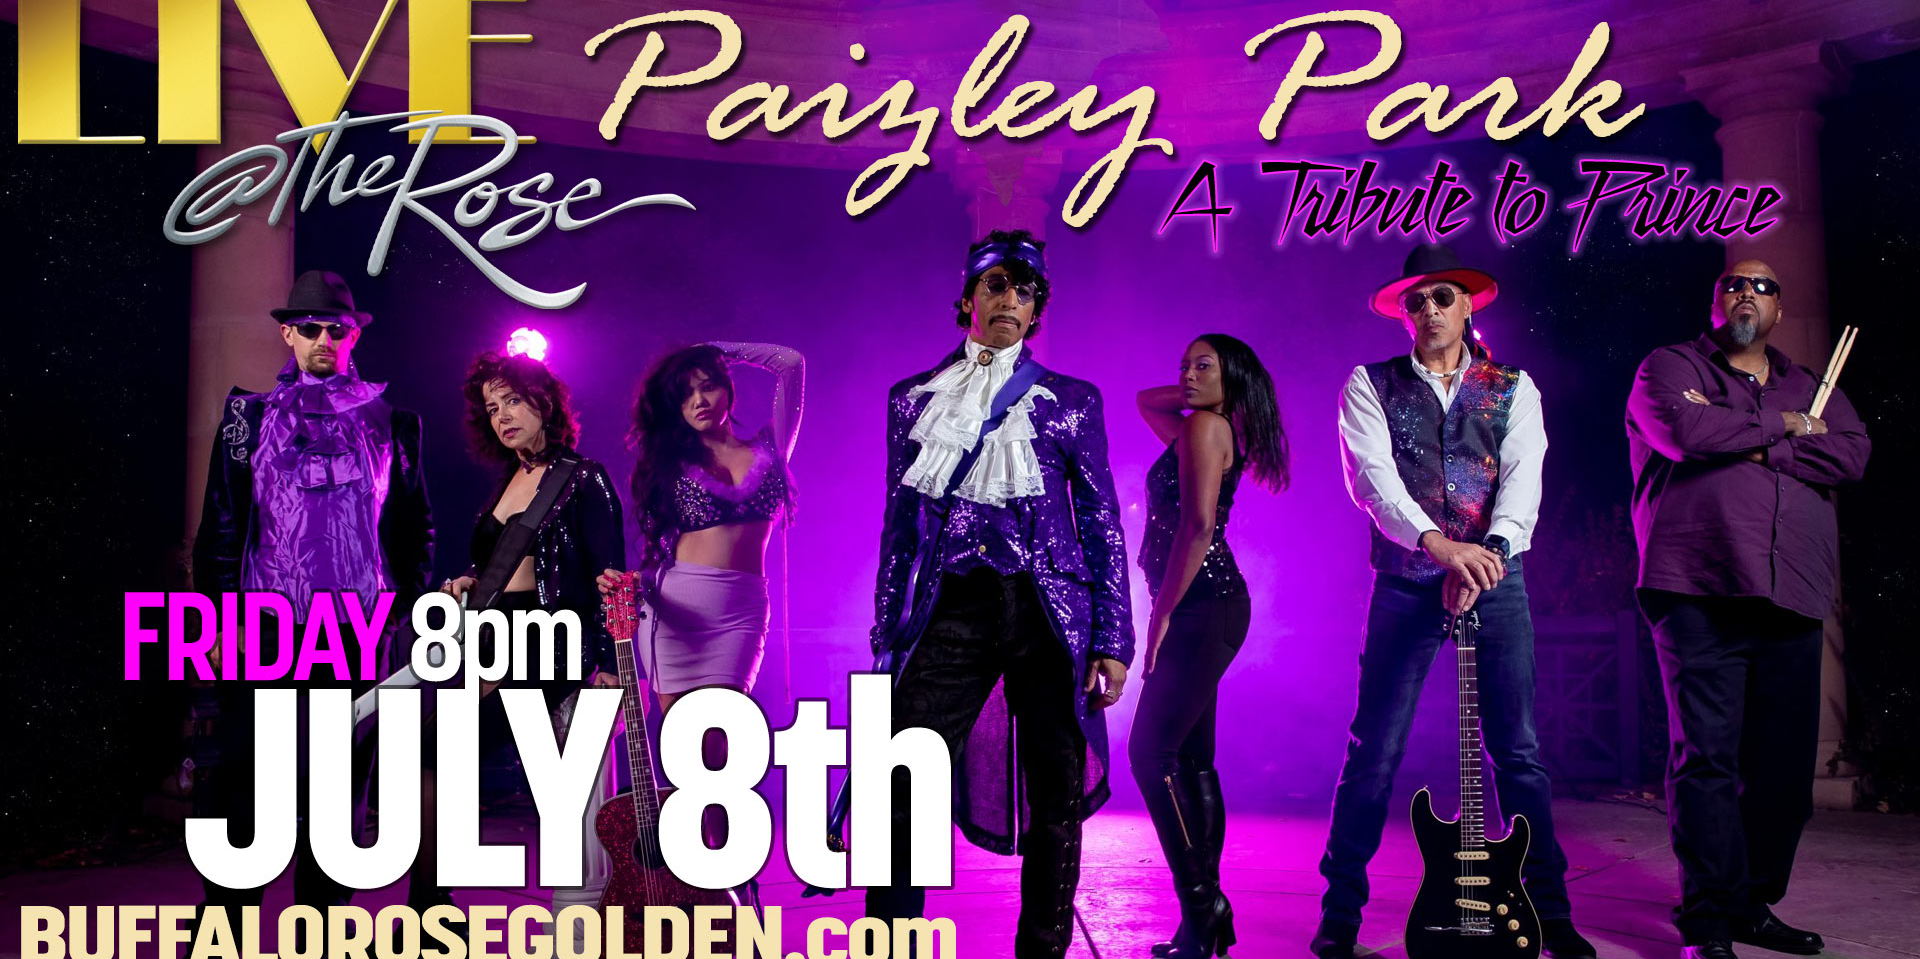 Live @ The Rose - Paizley Park - A Tribute to Prince promotional image